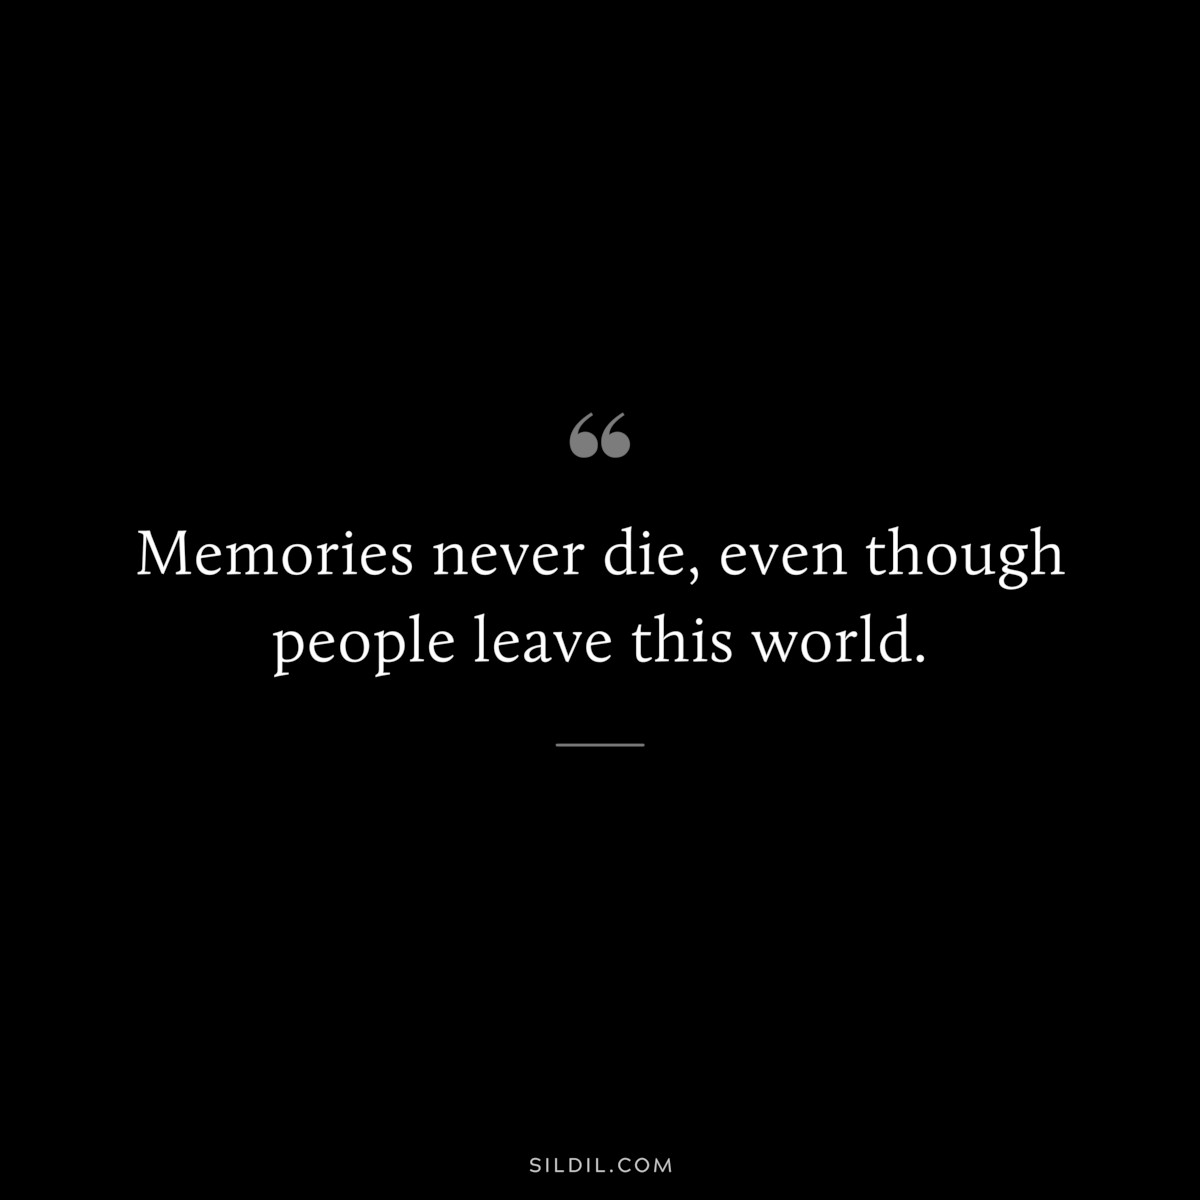 Memories never die, even though people leave this world.